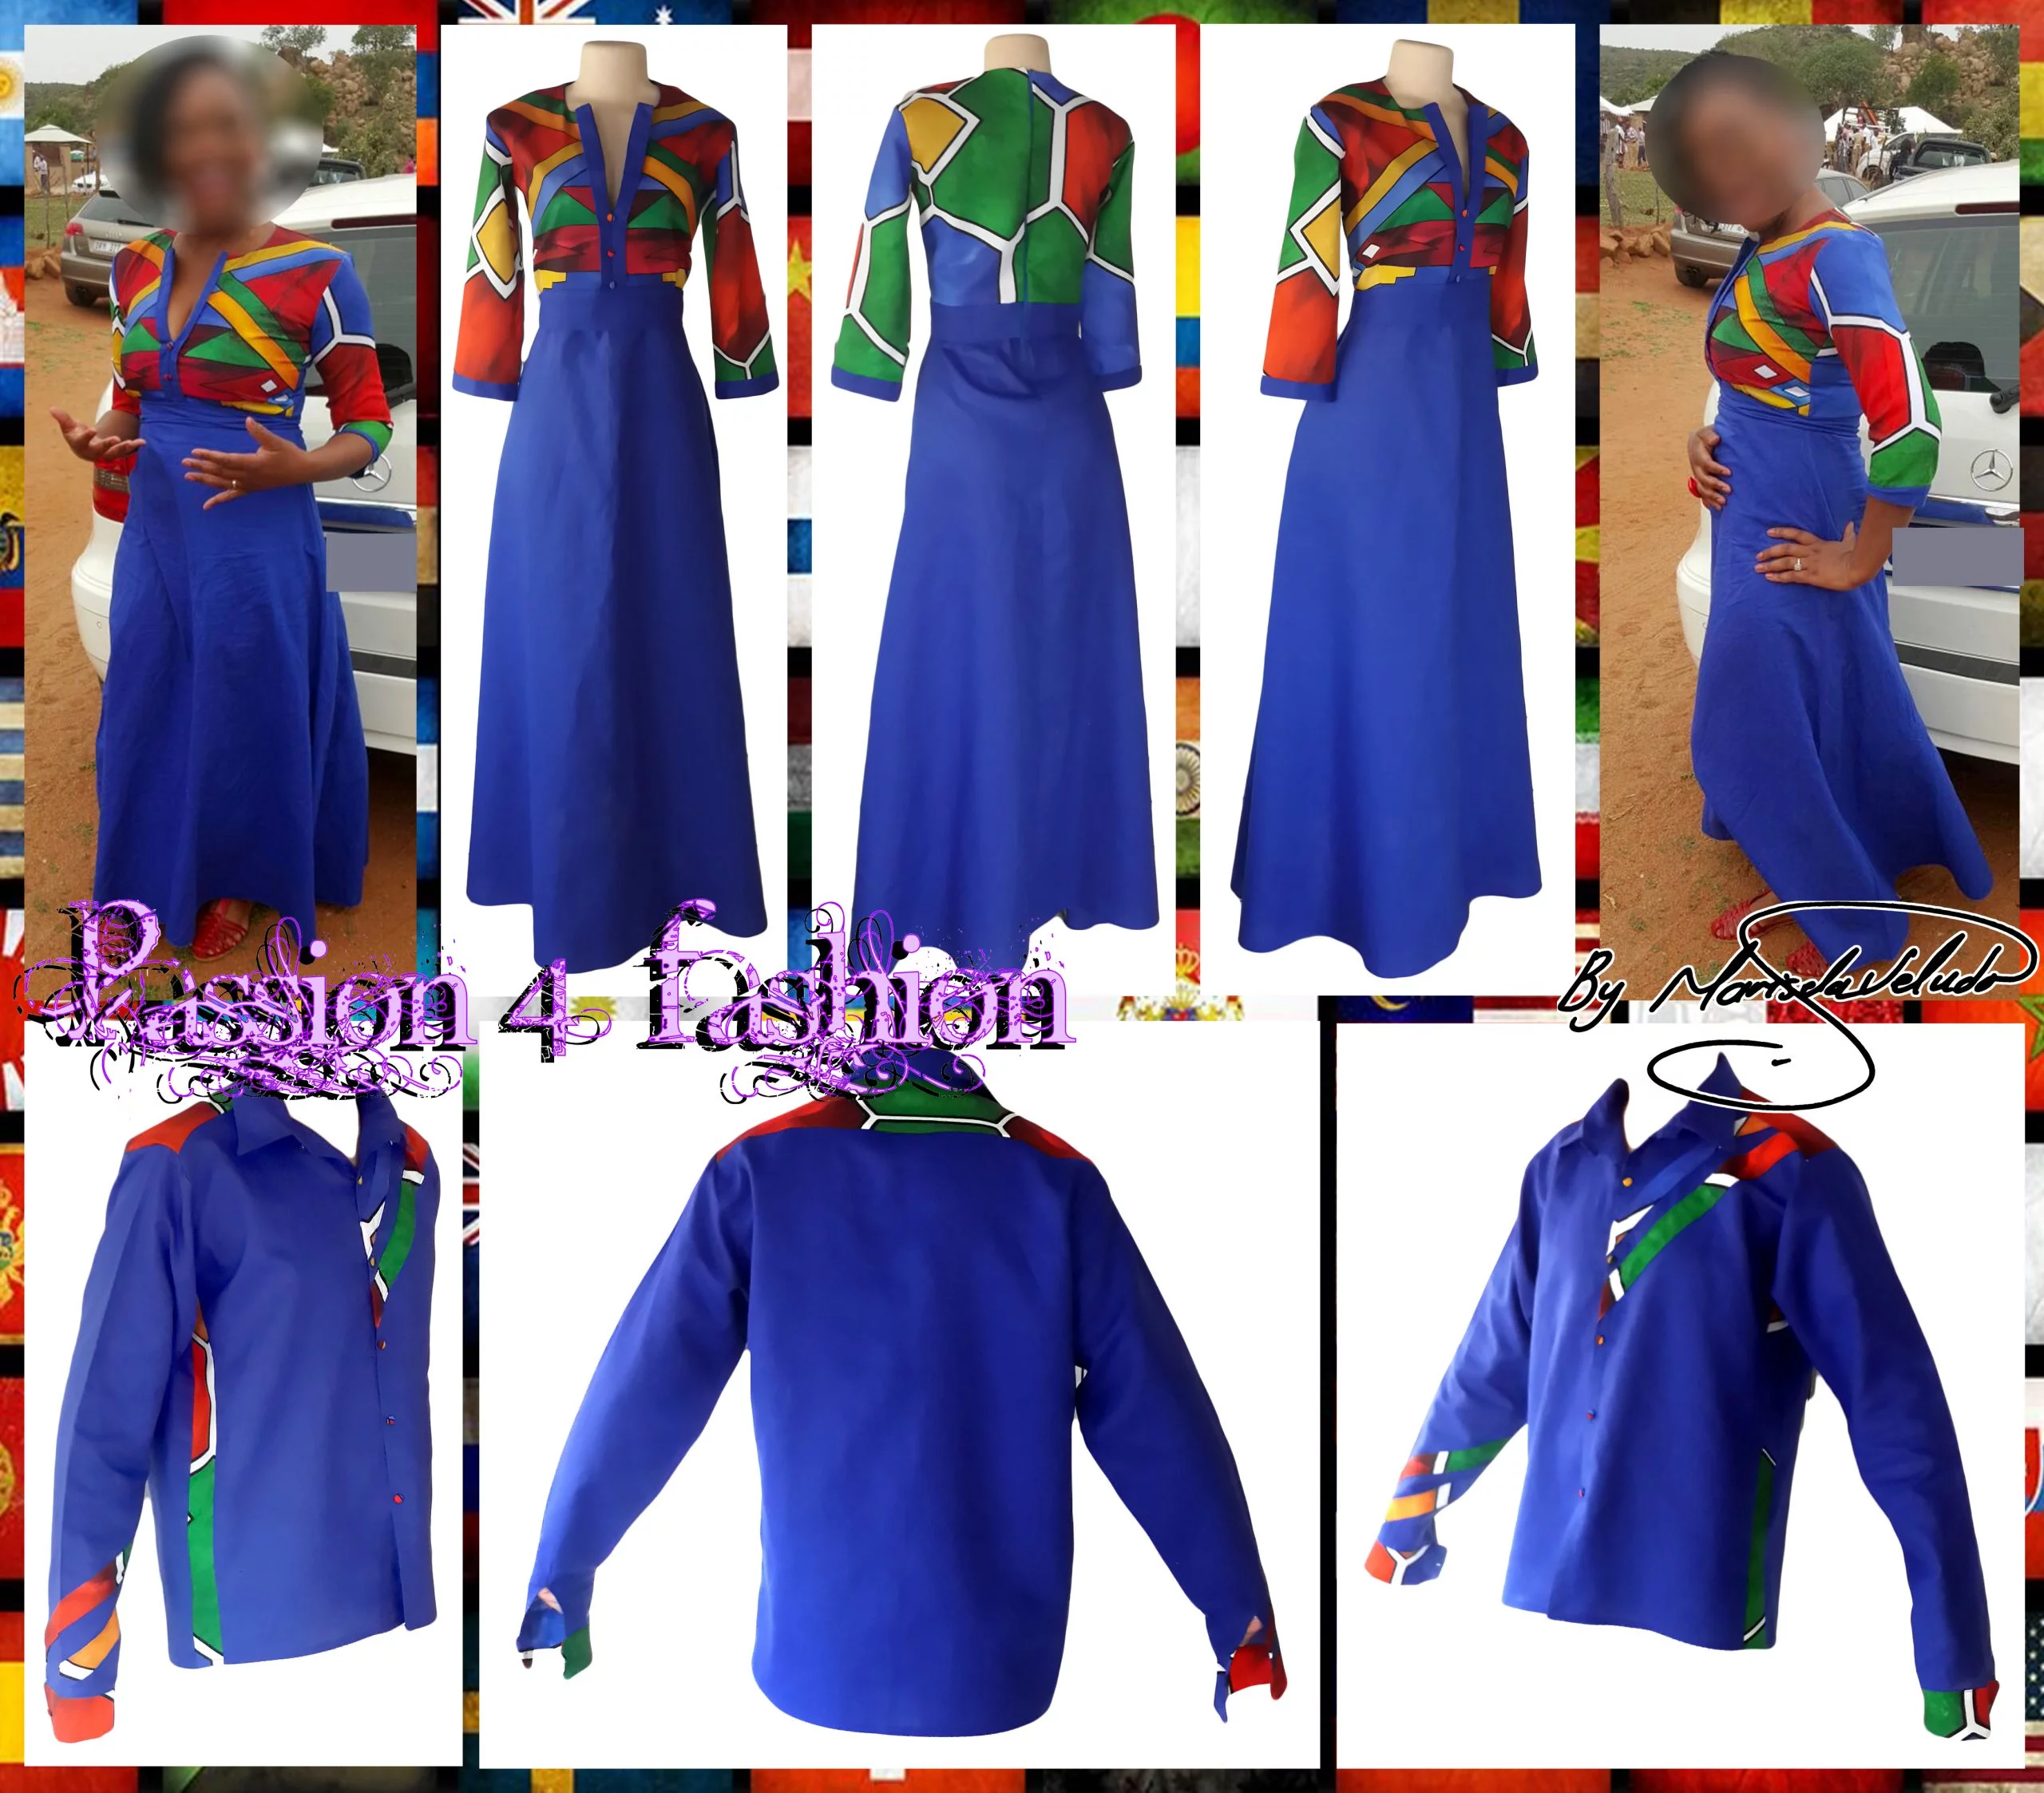 Royal blue ndebele dress and matching ndebele shirt 2 royal blue and ndebele empire fit dress. Bodice with ndebele print and 3/4 sleeves and an under bust belt. Mens matching ndebele shirt in royal blue. Traditional wedding attire.